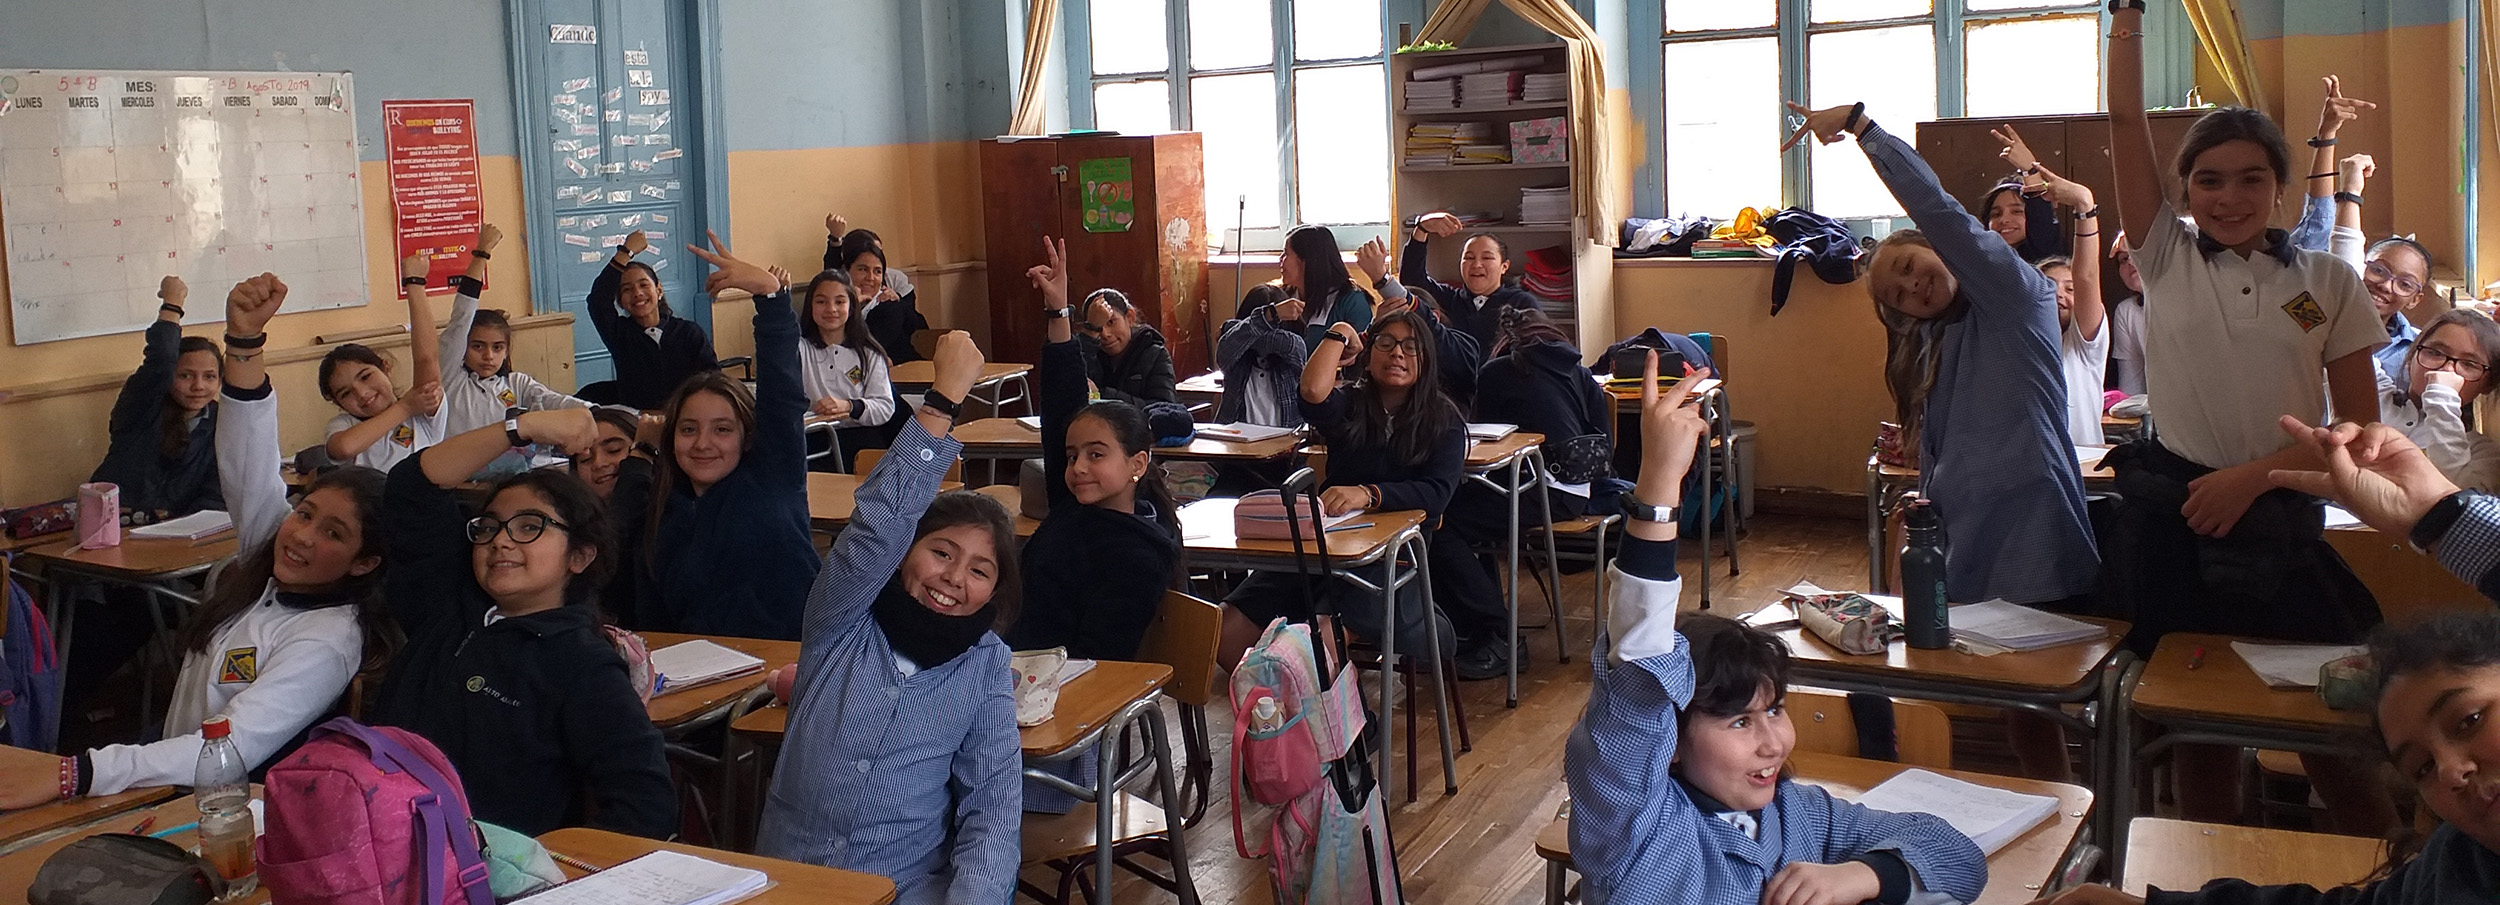 Juntos Santiago: Mobile technology and gamification to prevent childhood obesity in schools 